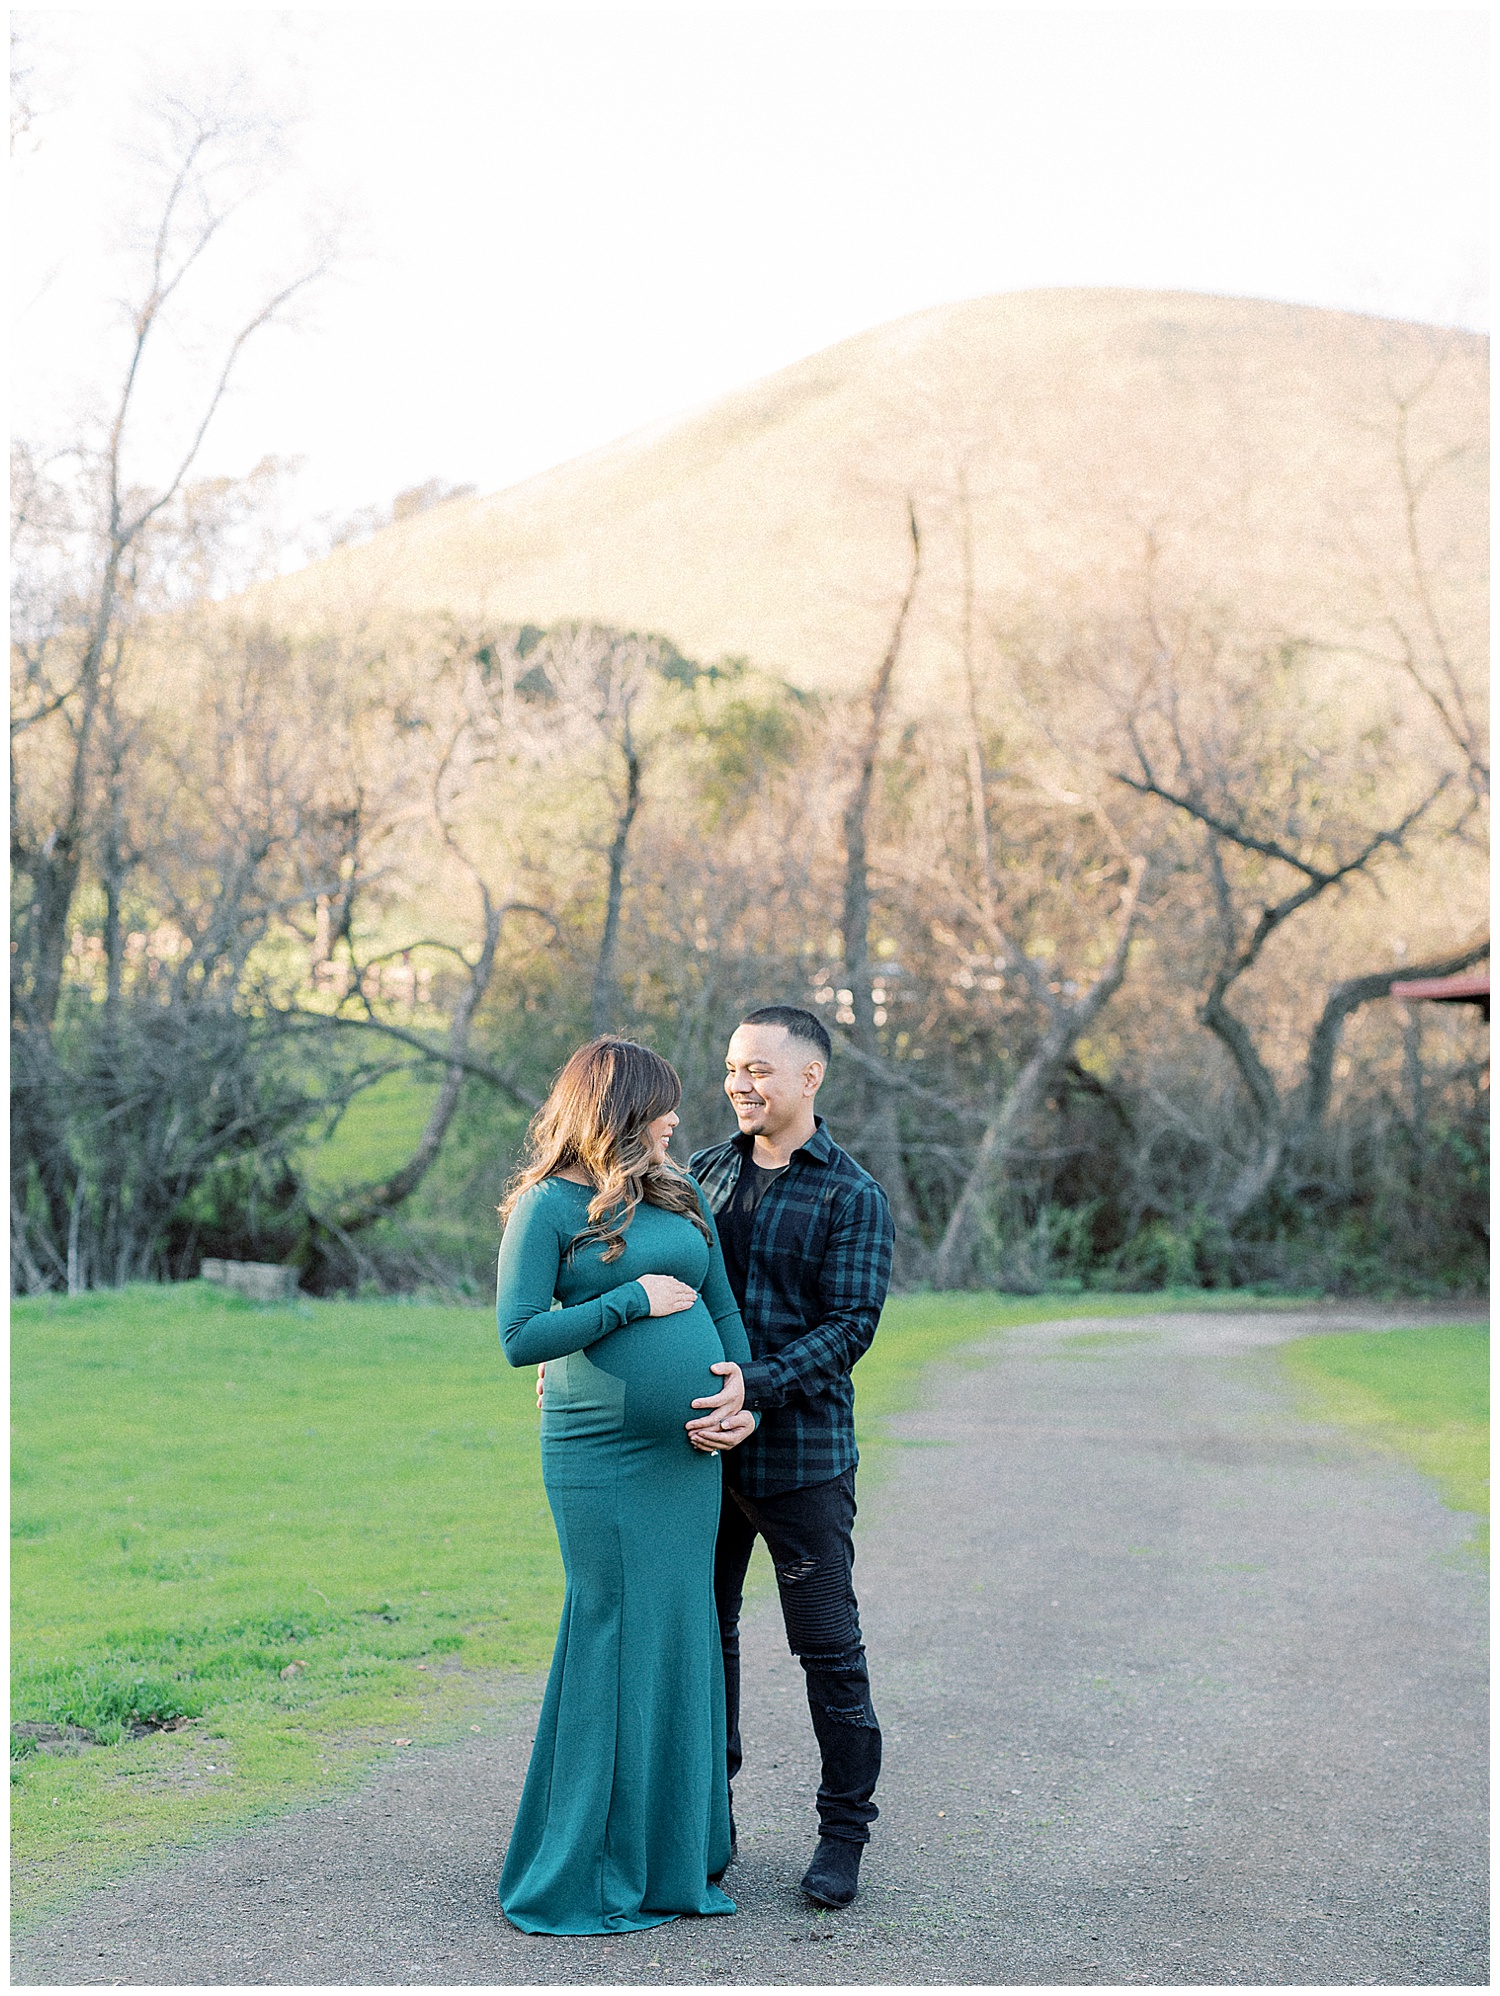 san francisco wedding and portrait photographer doing a maternity session in garin park fremont california, , maternity shoot with husband